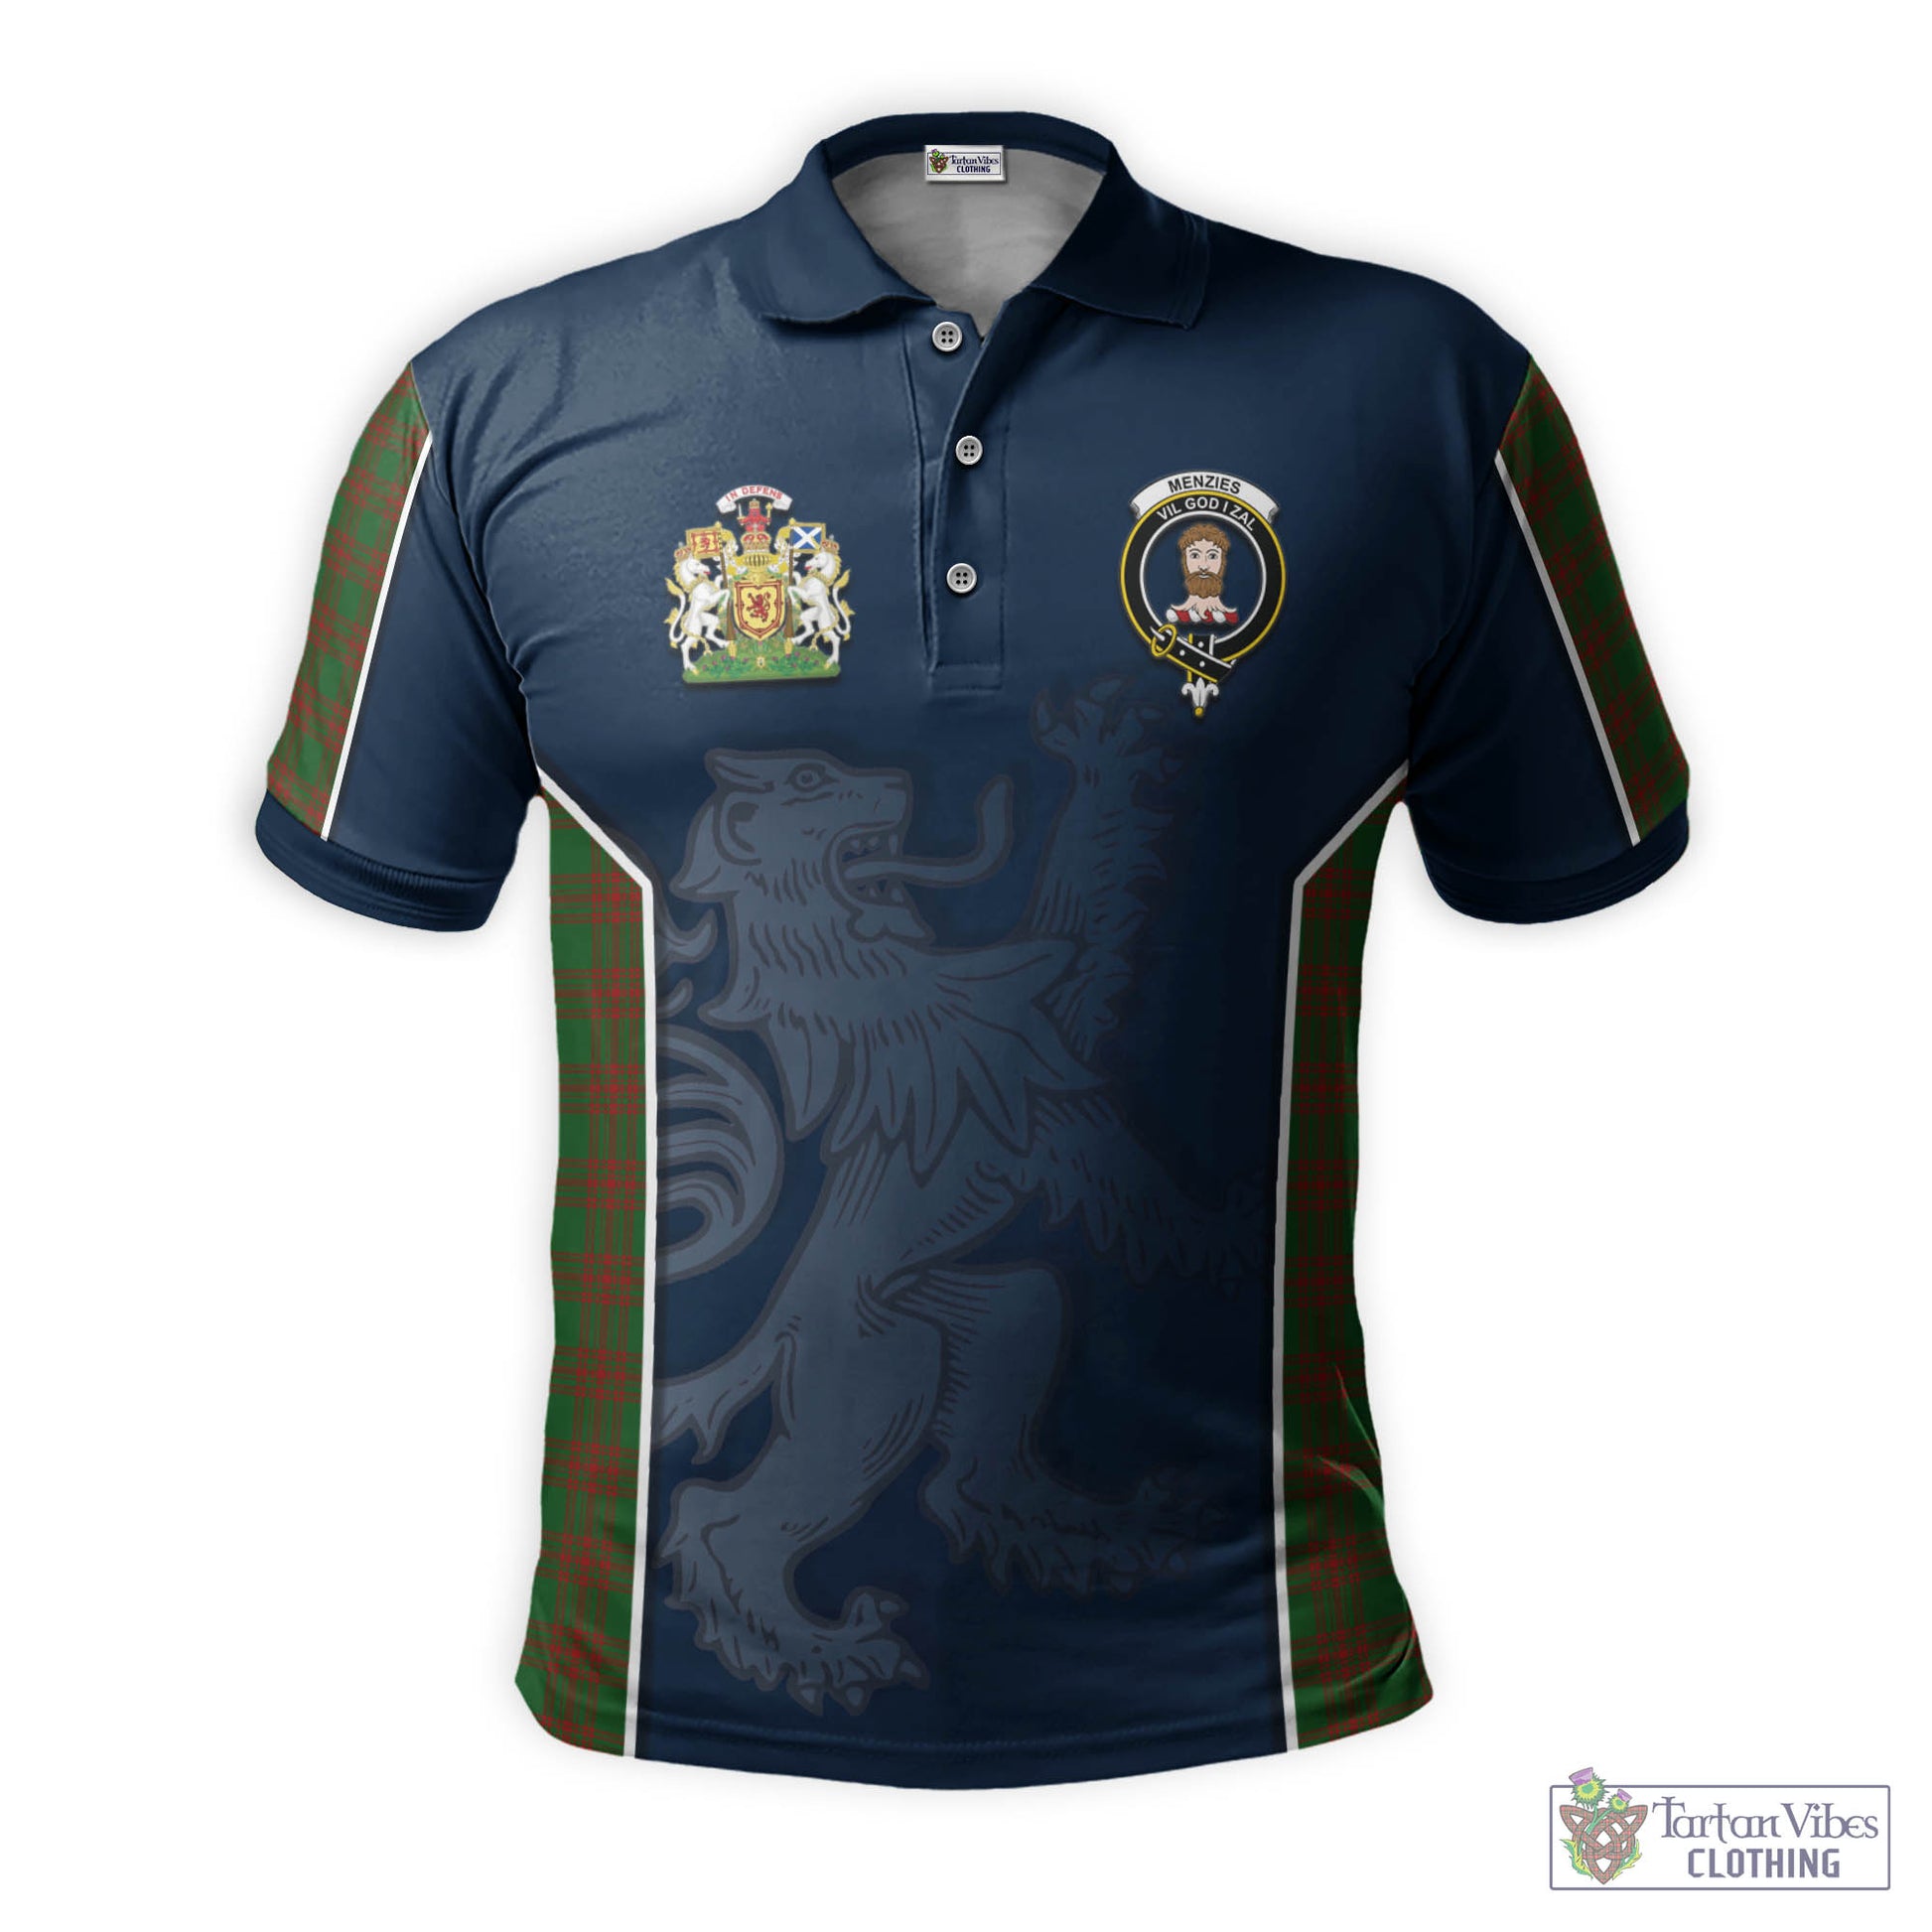 Tartan Vibes Clothing Menzies Tartan Men's Polo Shirt with Family Crest and Lion Rampant Vibes Sport Style